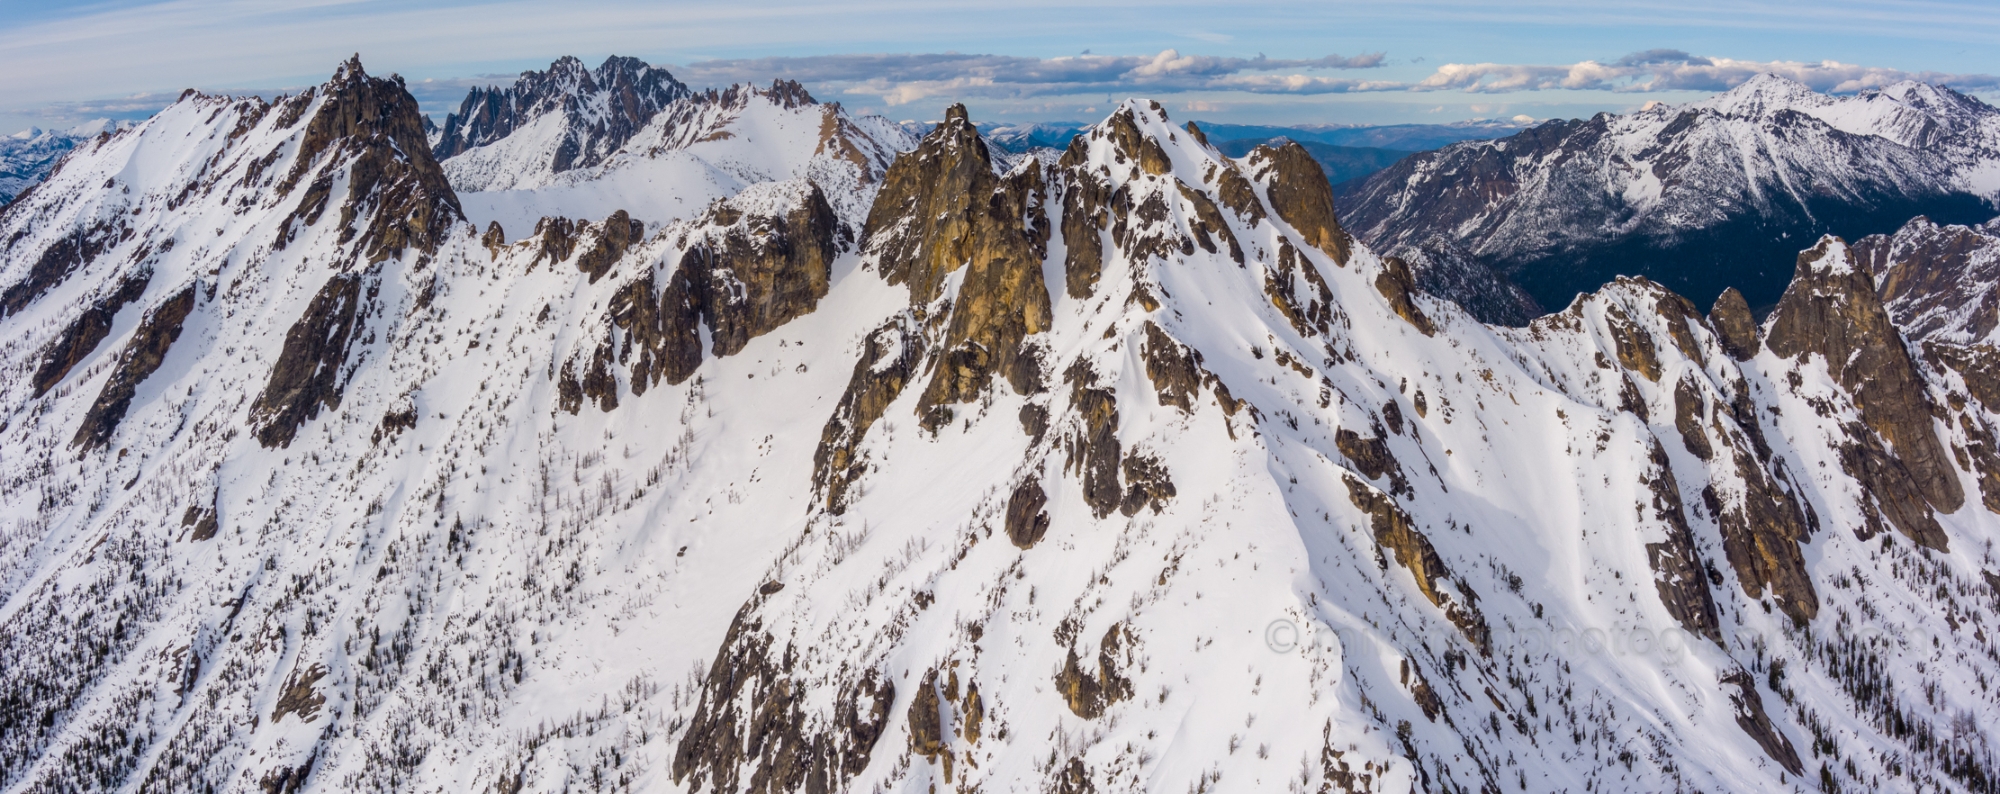 Over the North Cascades Silver Star and Kangaroo Peak Aerial Photography.jpg